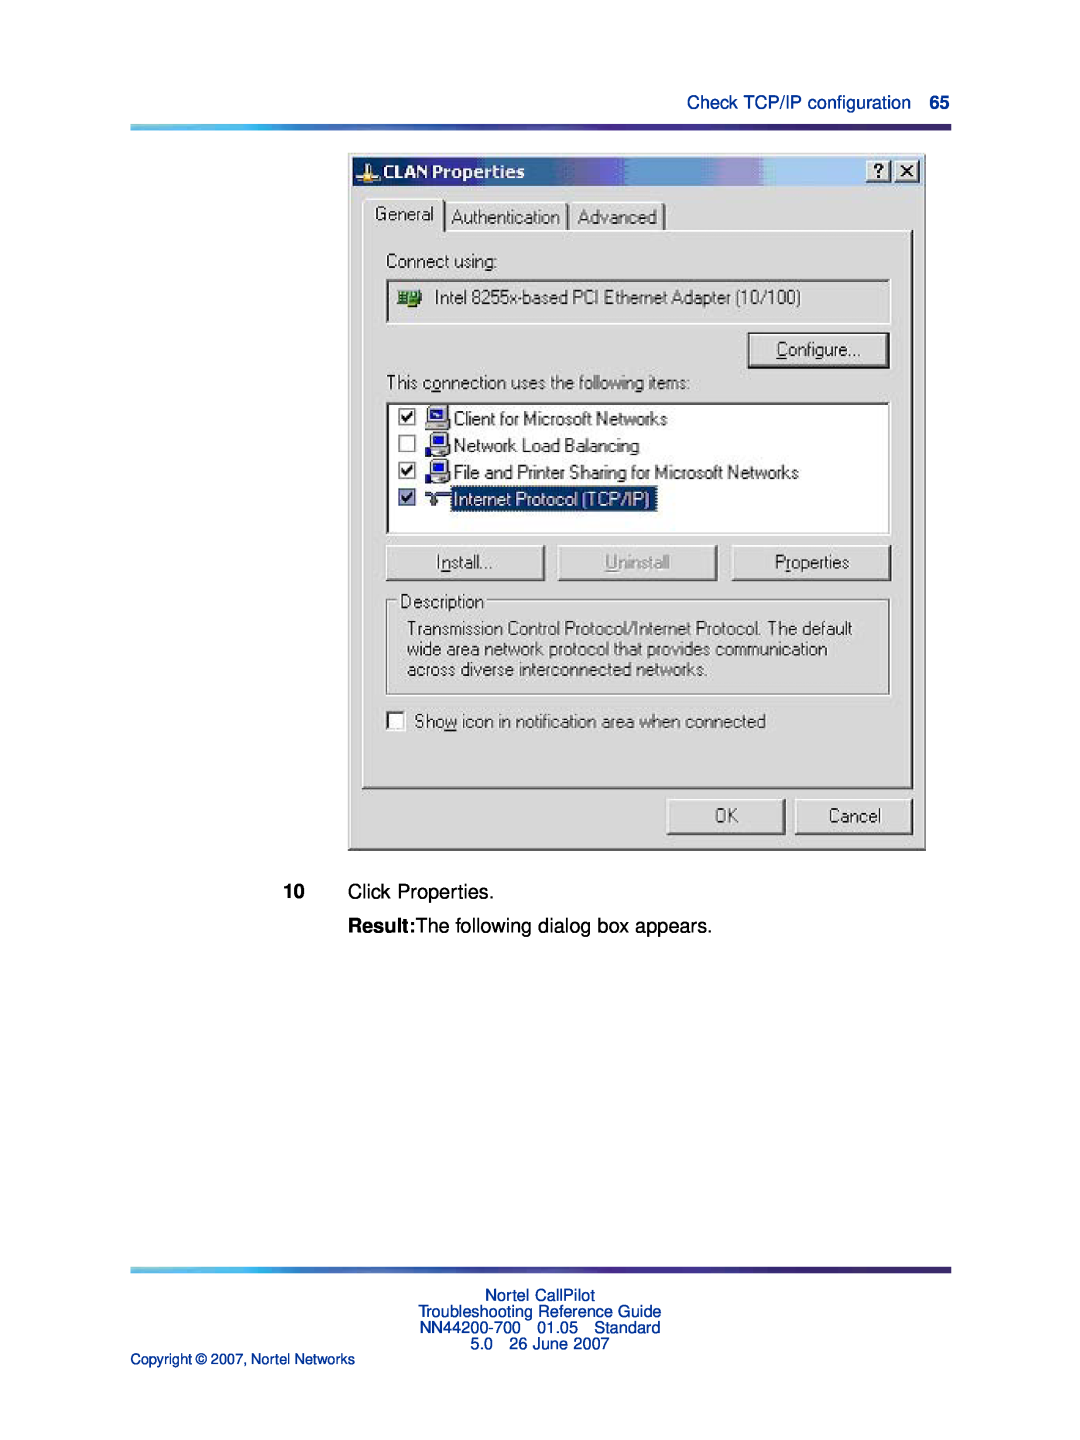 Nortel Networks NN44200-700 manual Click Properties ResultThe following dialog box appears, Check TCP/IP conﬁguration 